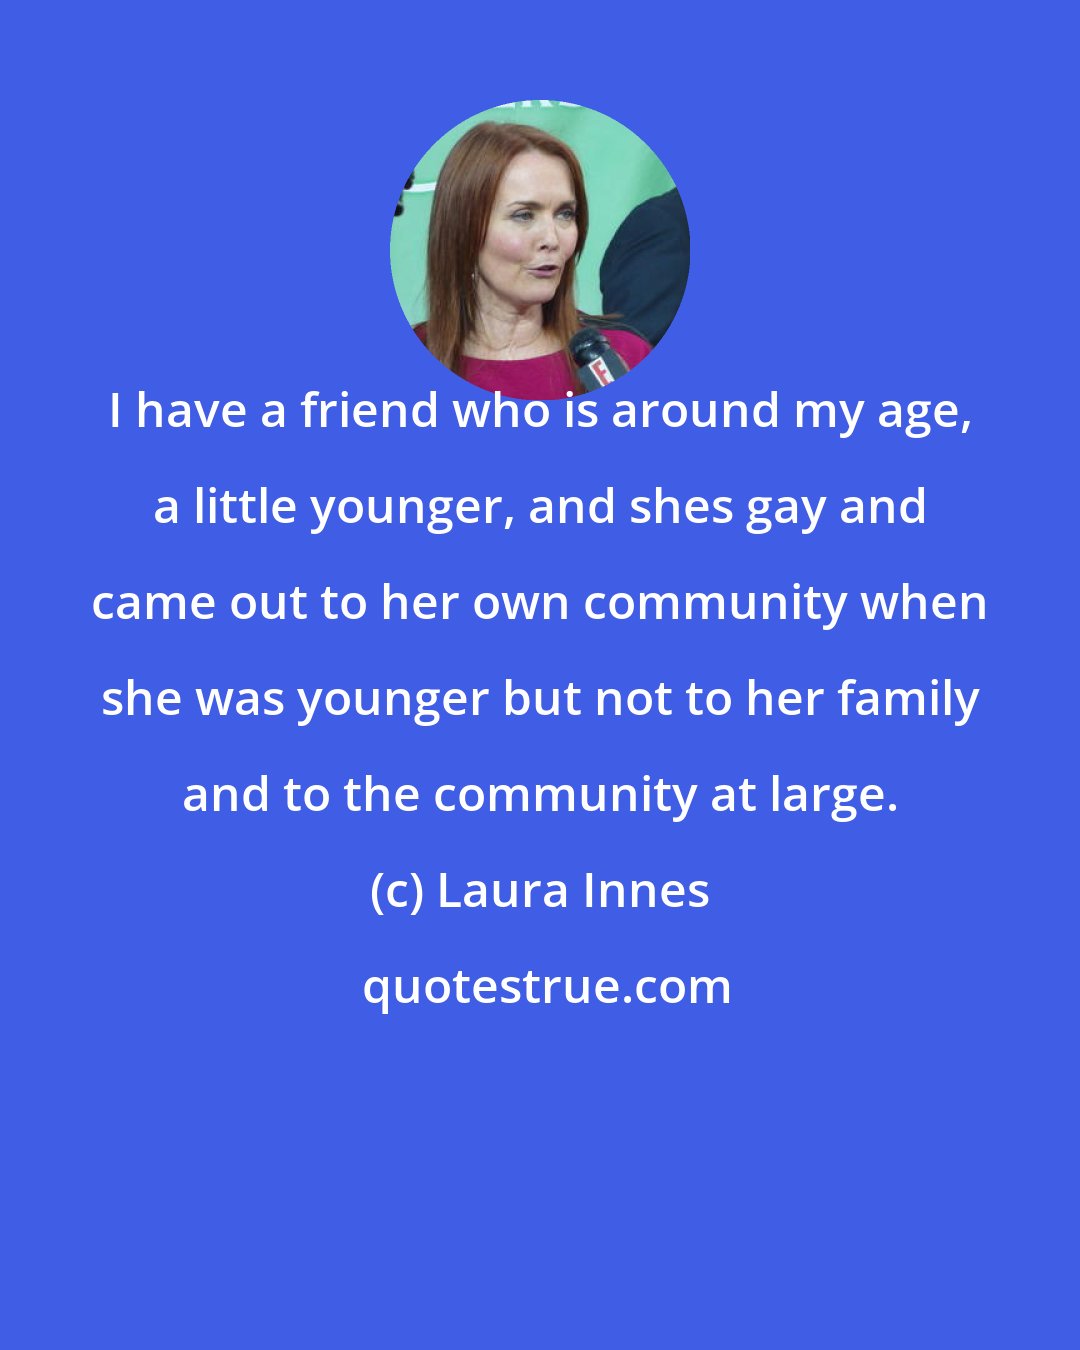 Laura Innes: I have a friend who is around my age, a little younger, and shes gay and came out to her own community when she was younger but not to her family and to the community at large.